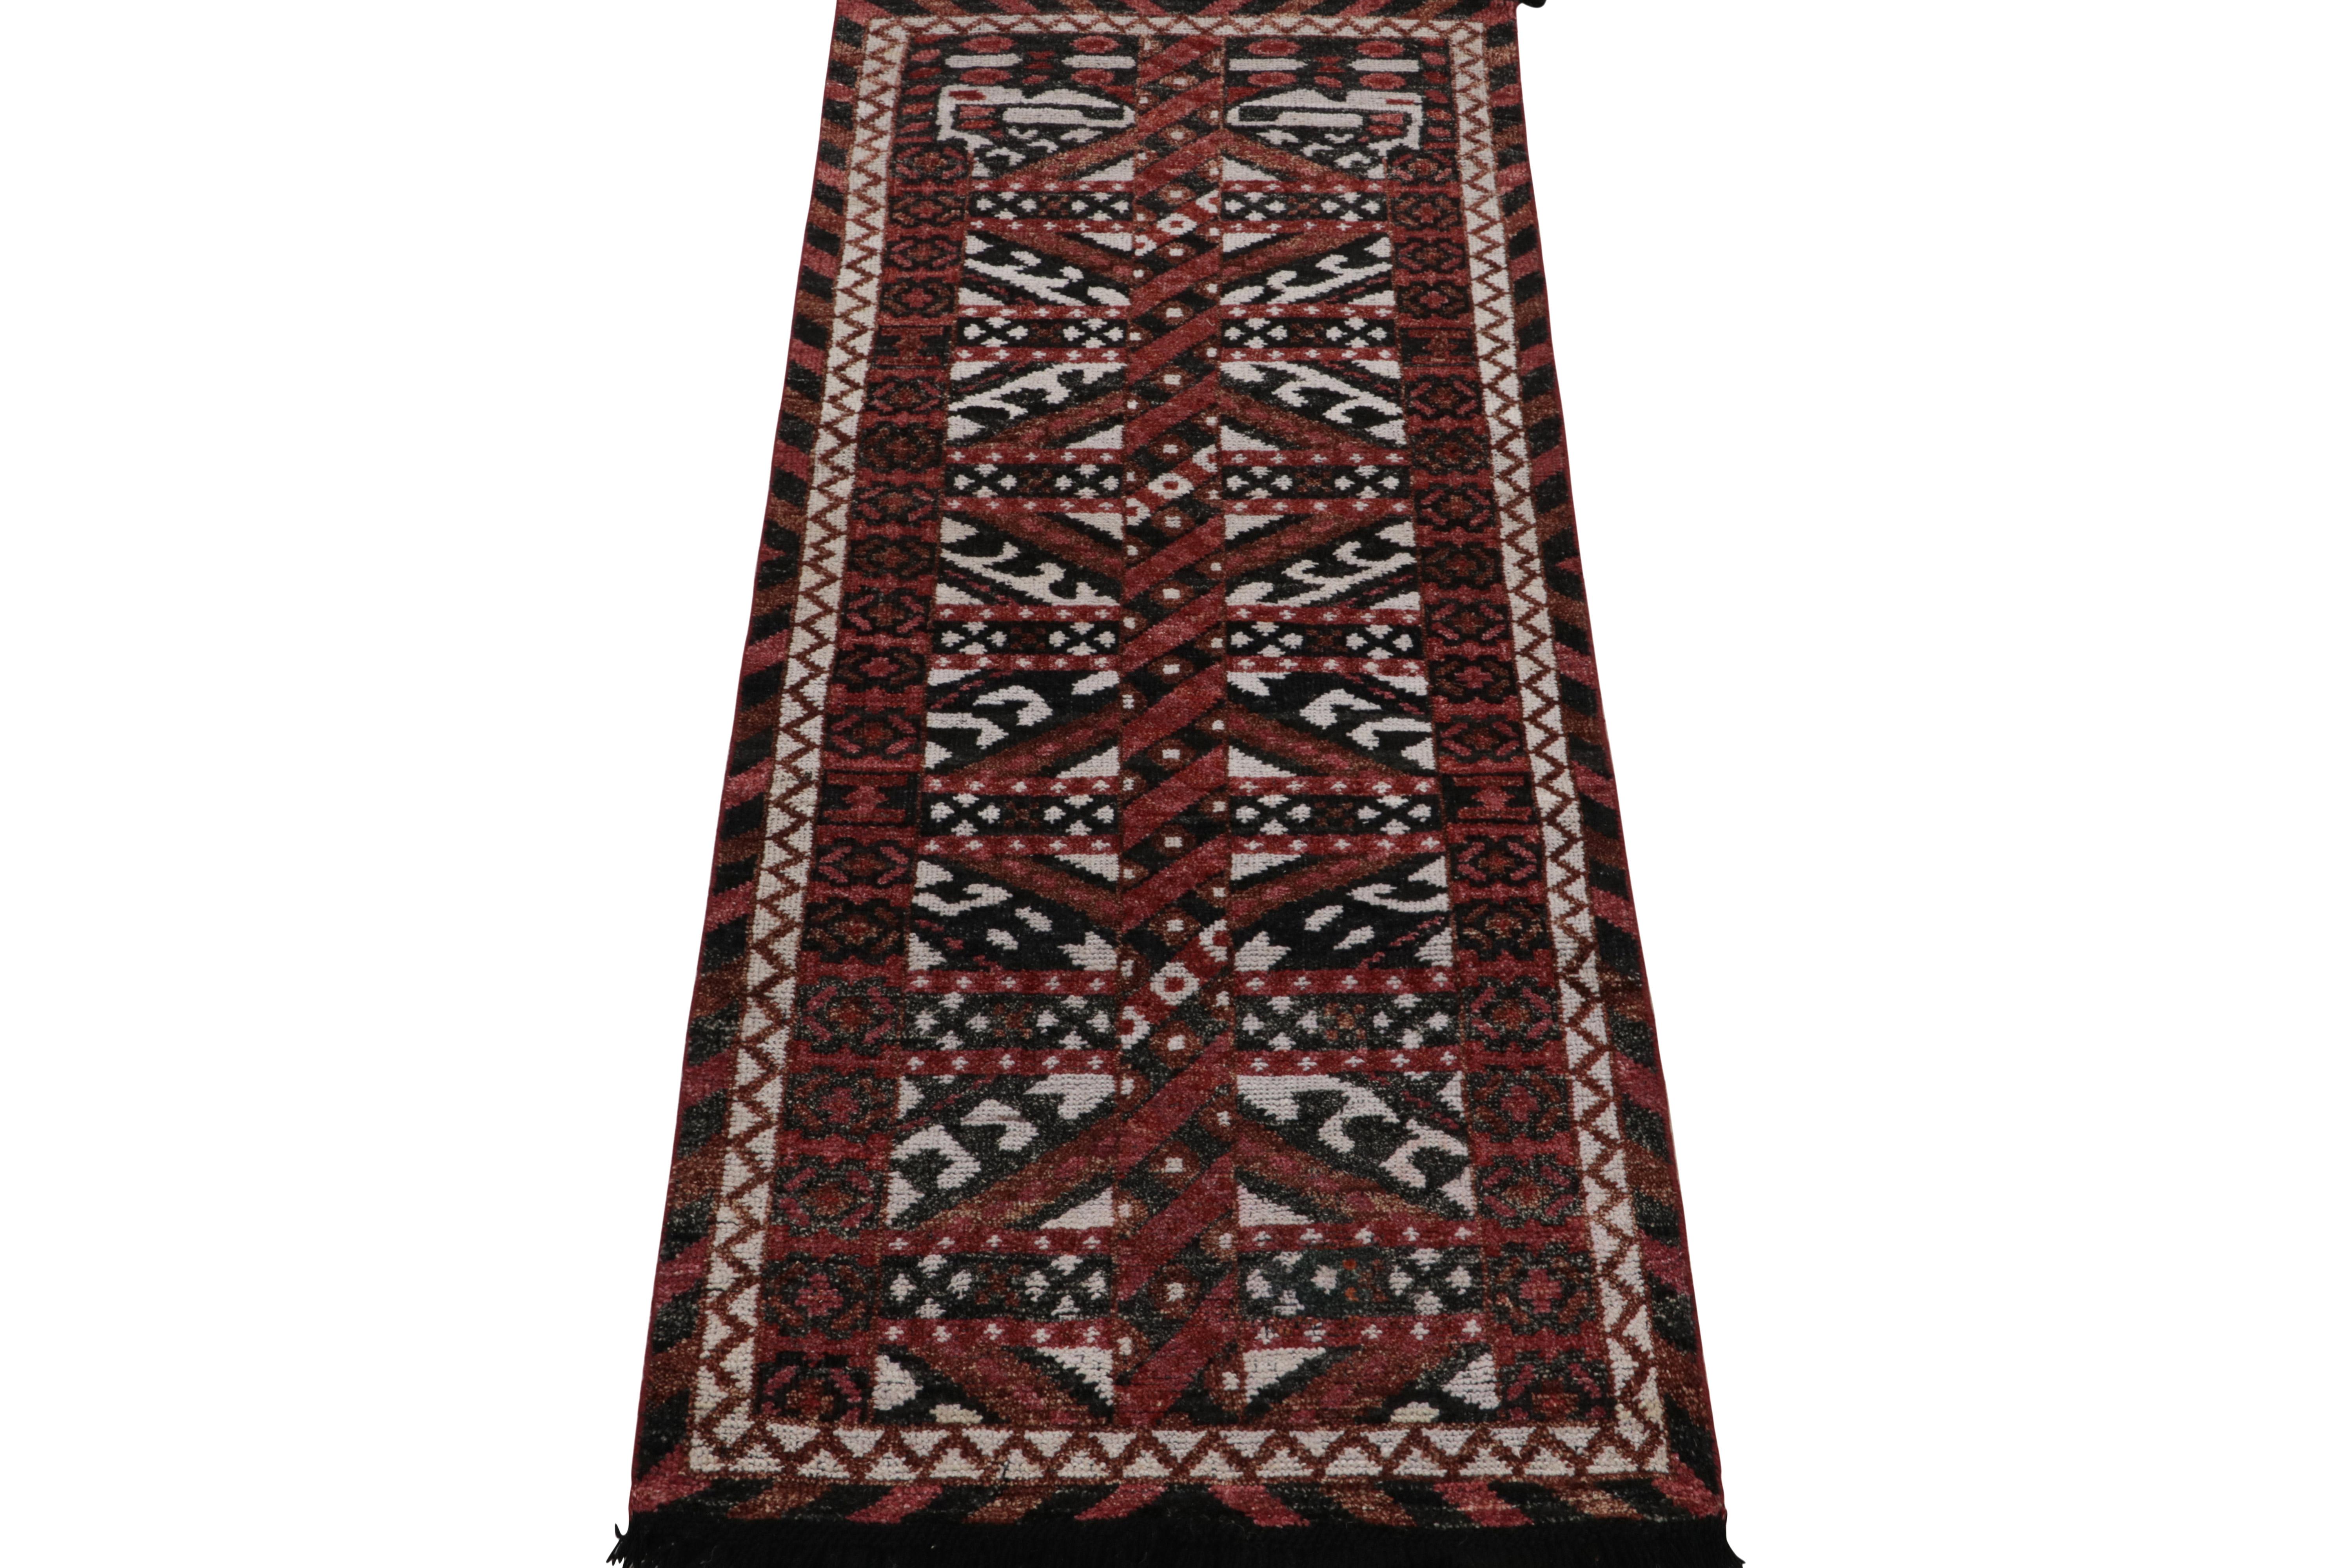 Connoting a contemporary take on nomadic tribal sensibilities, this 2x6 runner from Rug & Kilim’s Burano Collection showcases bold geometric patterns in deep red, chocolate brown, white & black for exceptional movement in this scale. Connoisseurs